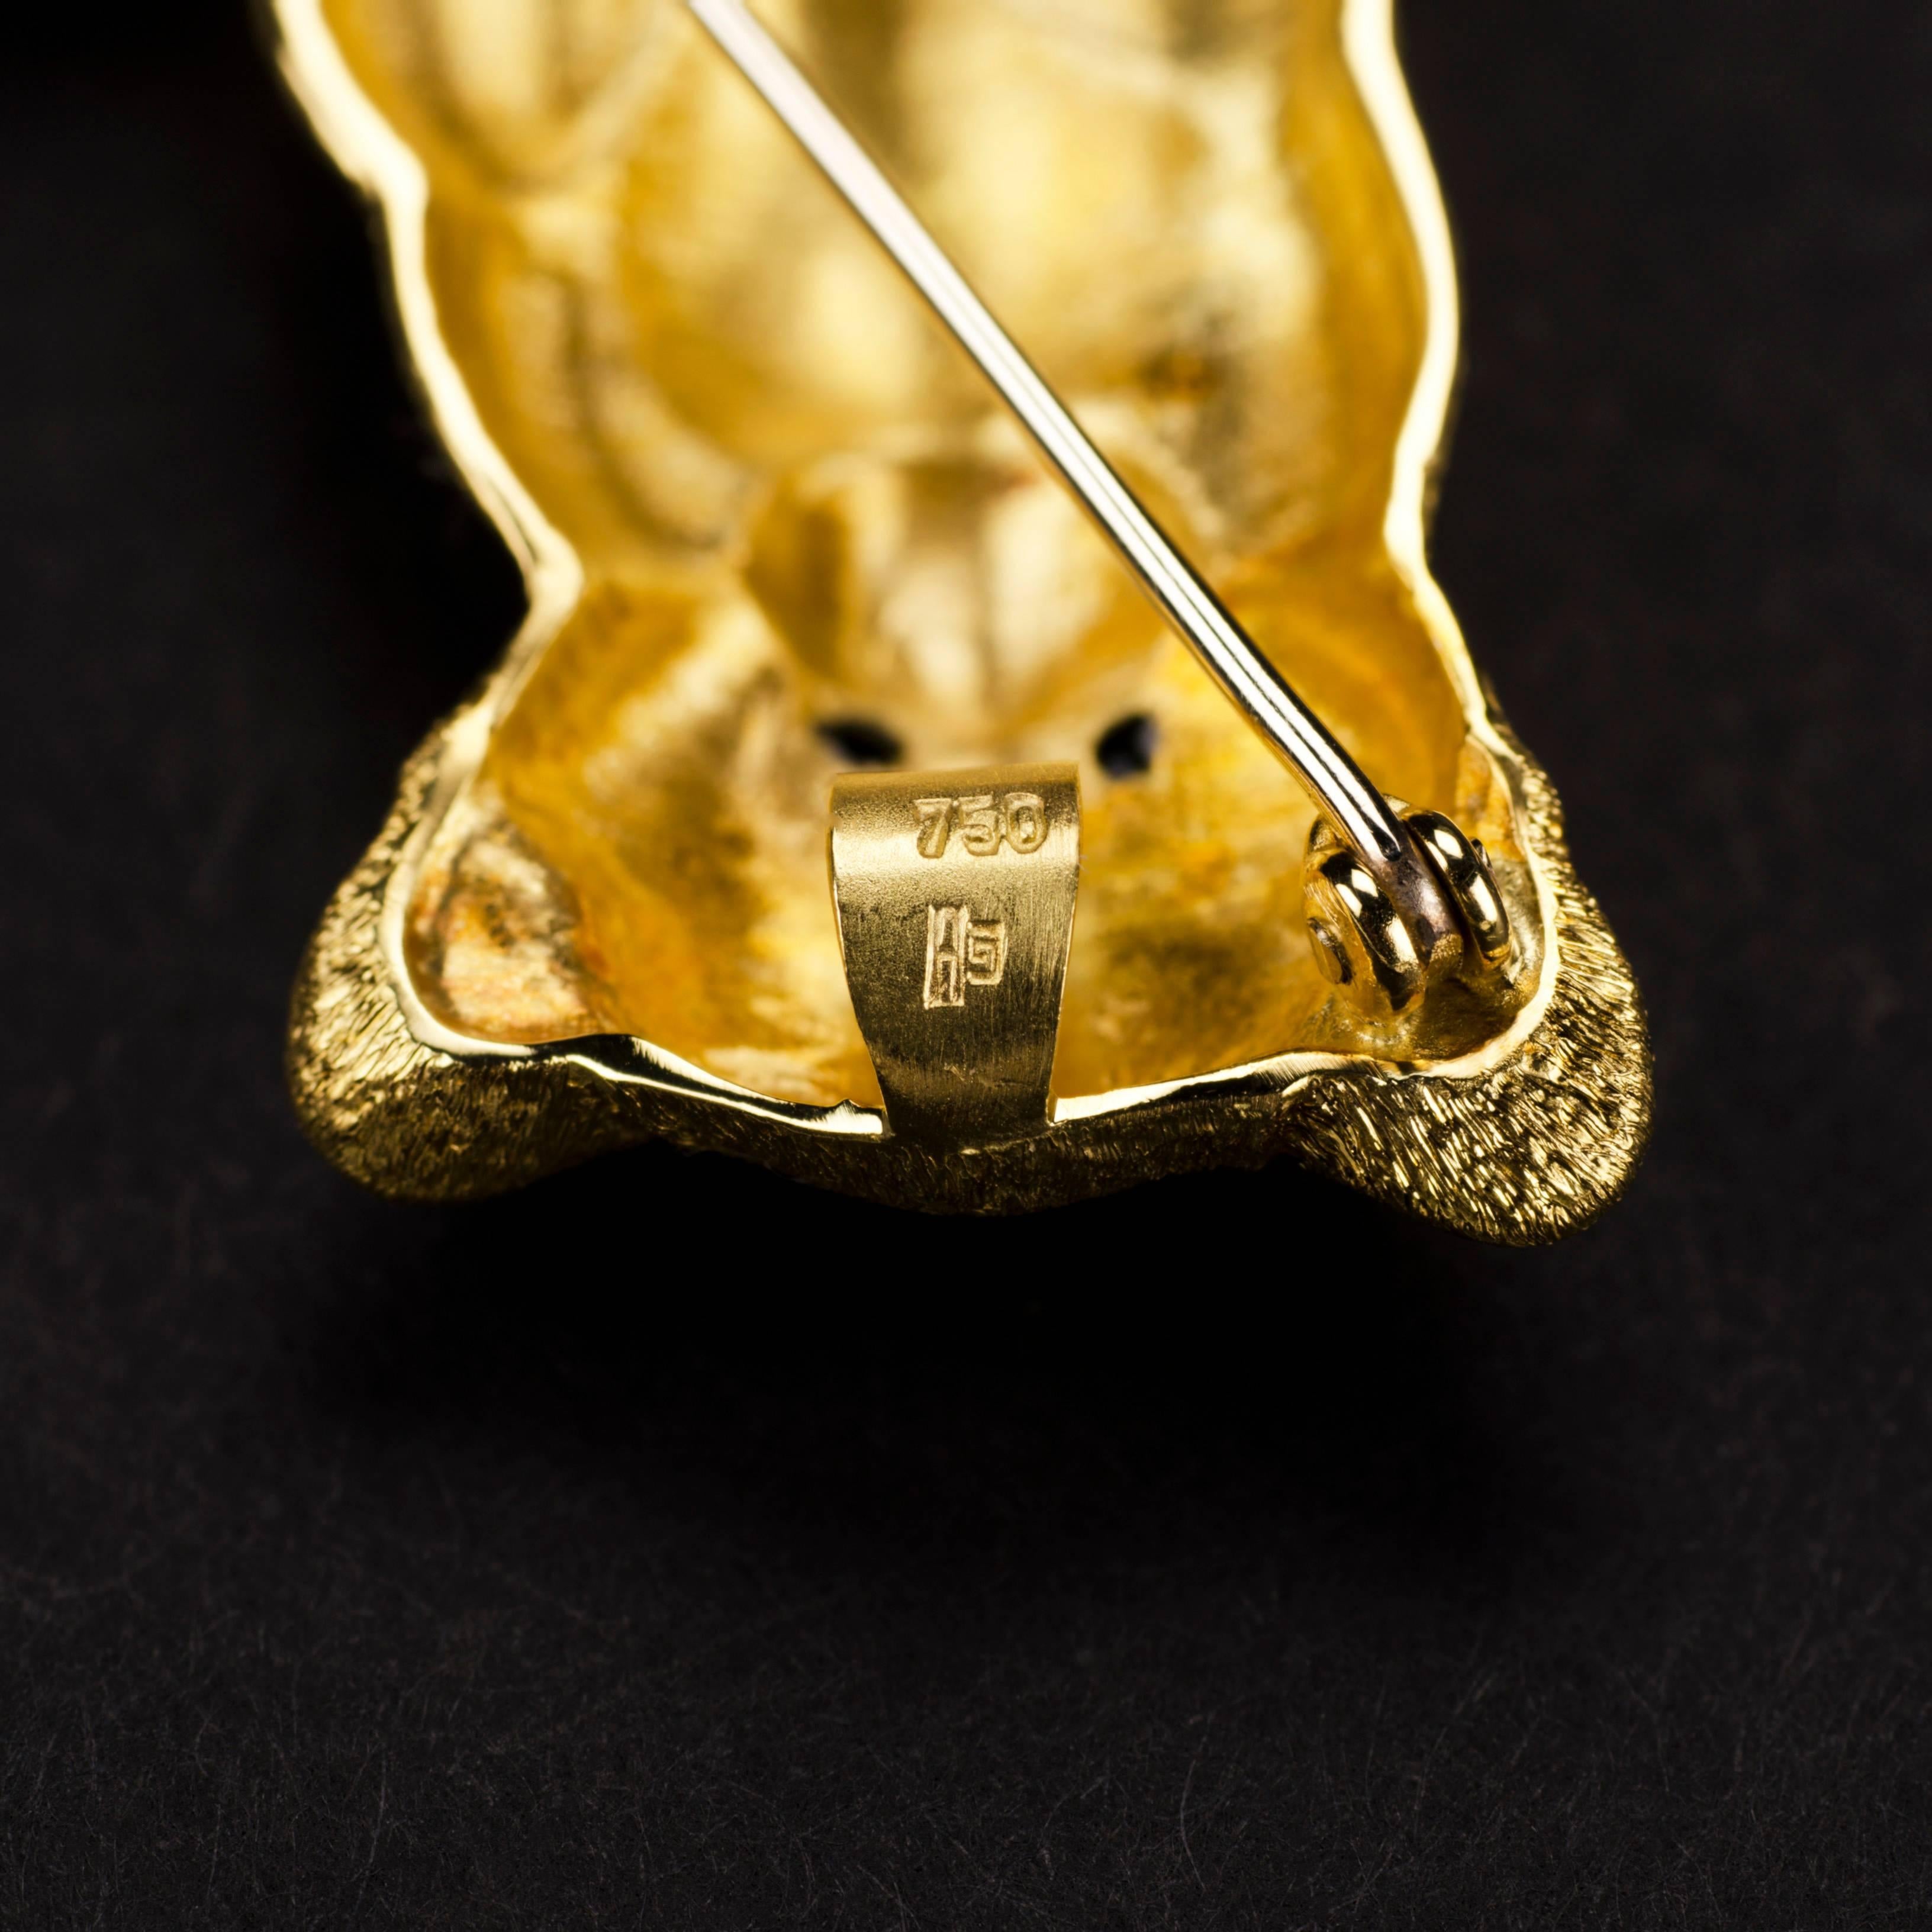 18 Carat Yellow Gold Lion Cub Brooch or Pendant with a Cushion of Rubies For Sale 2